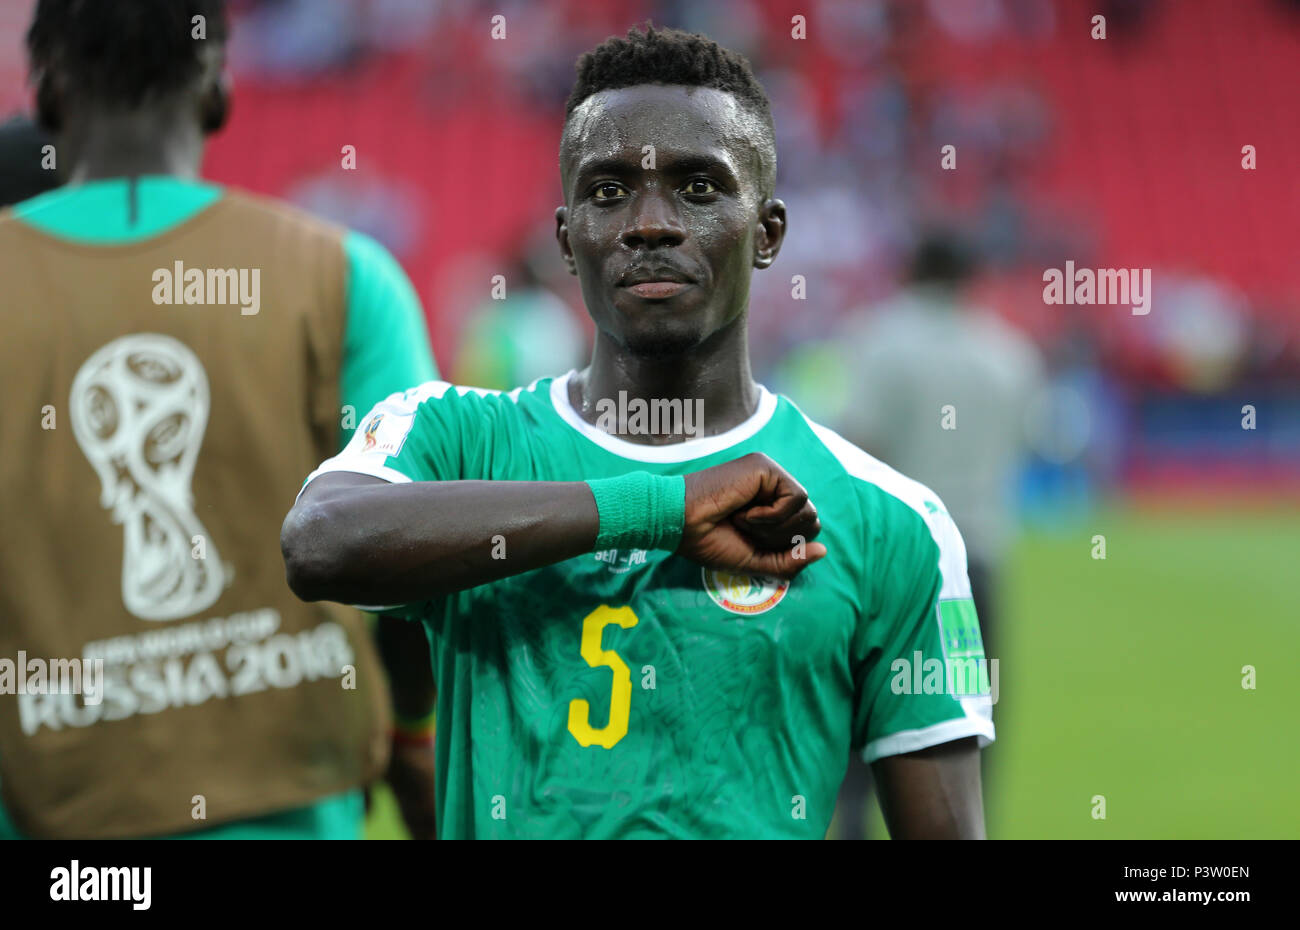 Idrissa Gueye SENEGAL POLAND V SENEGAL, 2018 FIFA WORLD CUP RUSSIA 19 June 2018 GBC8358 Poland v Senegal 2018 FIFA World Cup Russia Spartak Stadium Moscow STRICTLY EDITORIAL USE ONLY. If The Player/Players Depicted In This Image Is/Are Playing For An English Club Or The England National Team. Then This Image May Only Be Used For Editorial Purposes. No Commercial Use. The Following Usages Are Also Restricted EVEN IF IN AN EDITORIAL CONTEXT: Use in conjuction with, or part of, any unauthorized audio, video, data, fixture lists, club/league logos, Betting, Games or any 'live' se Stock Photo